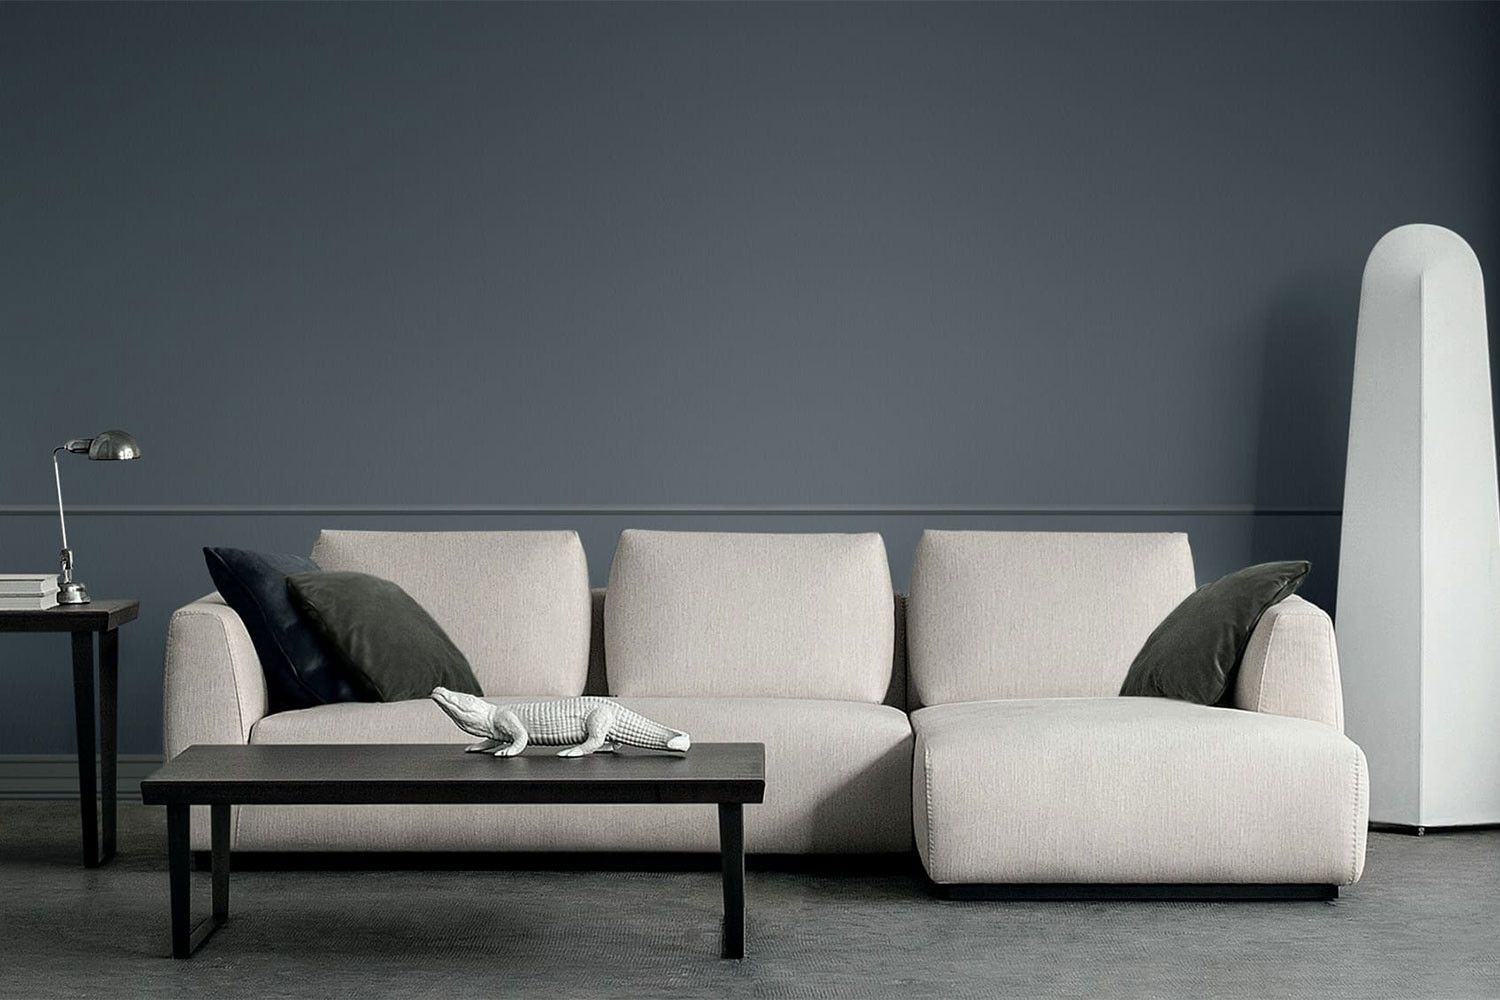 Minimalist Tight Seat Sectional Sofa Anyway | Bodema In Microfiber Sectional Corner Sofas (View 6 of 15)